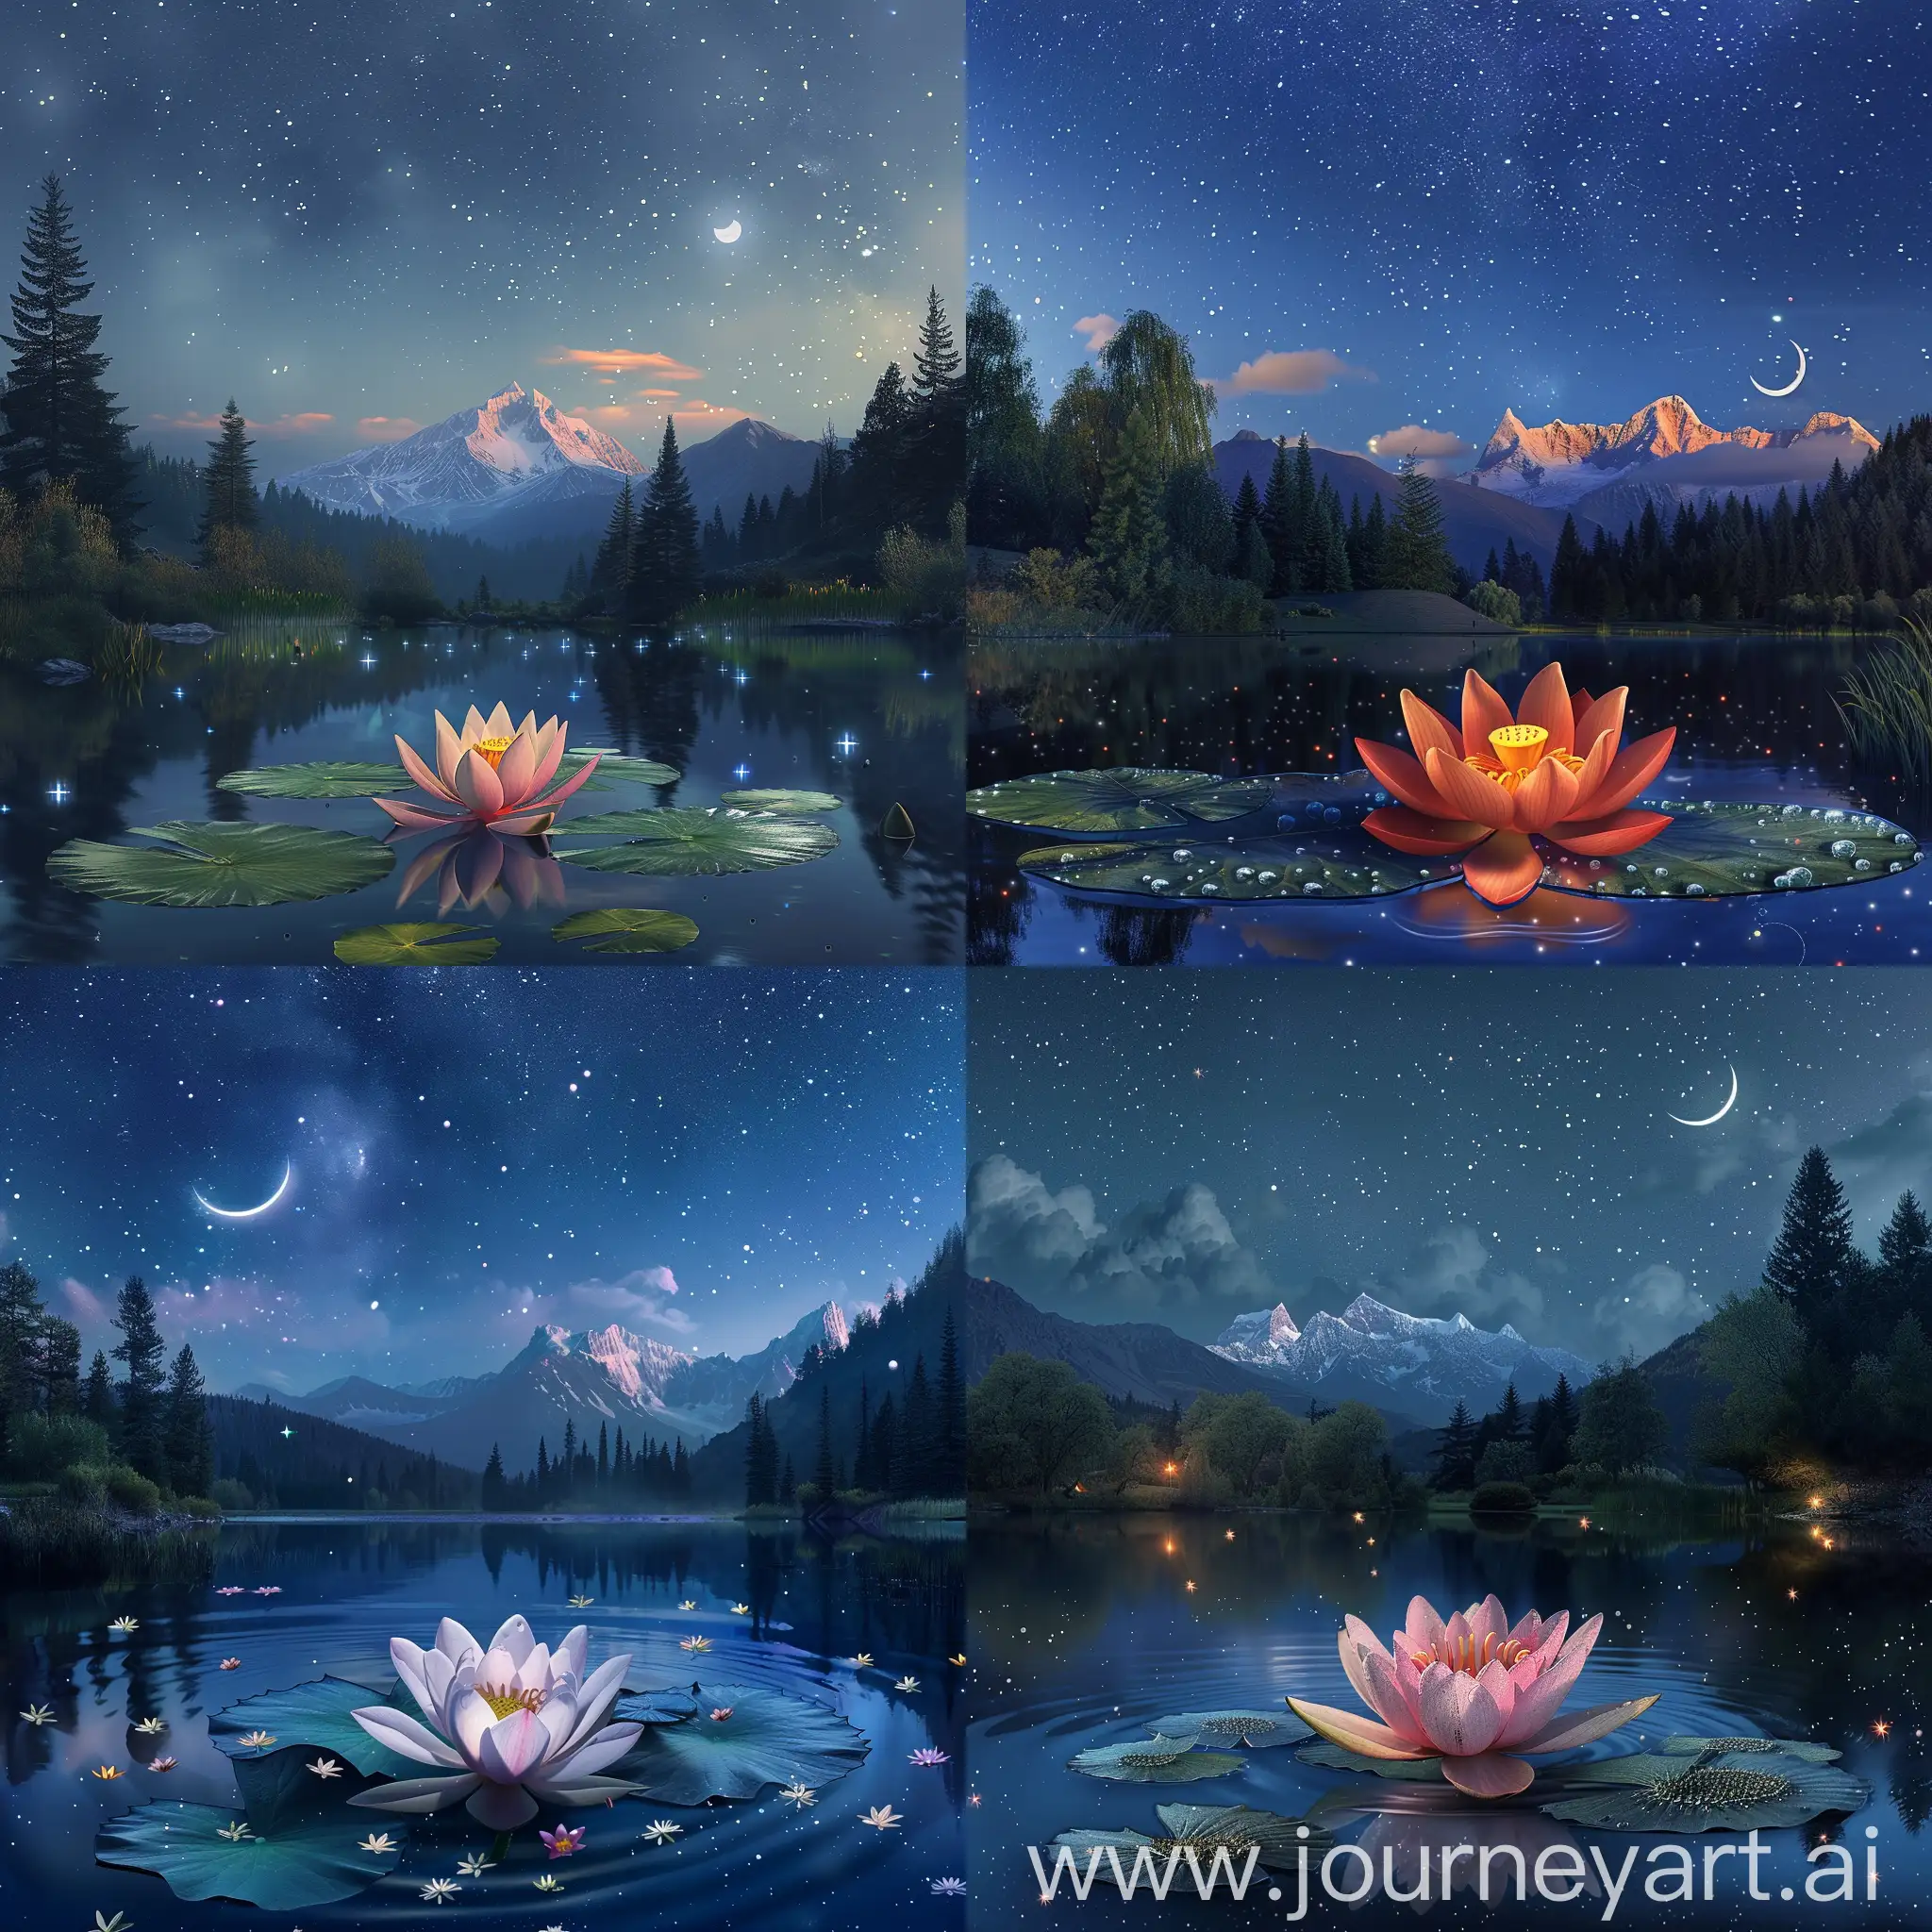 Moonlit-Lotus-Lake-with-Snowy-Mountains-and-Starry-Sky